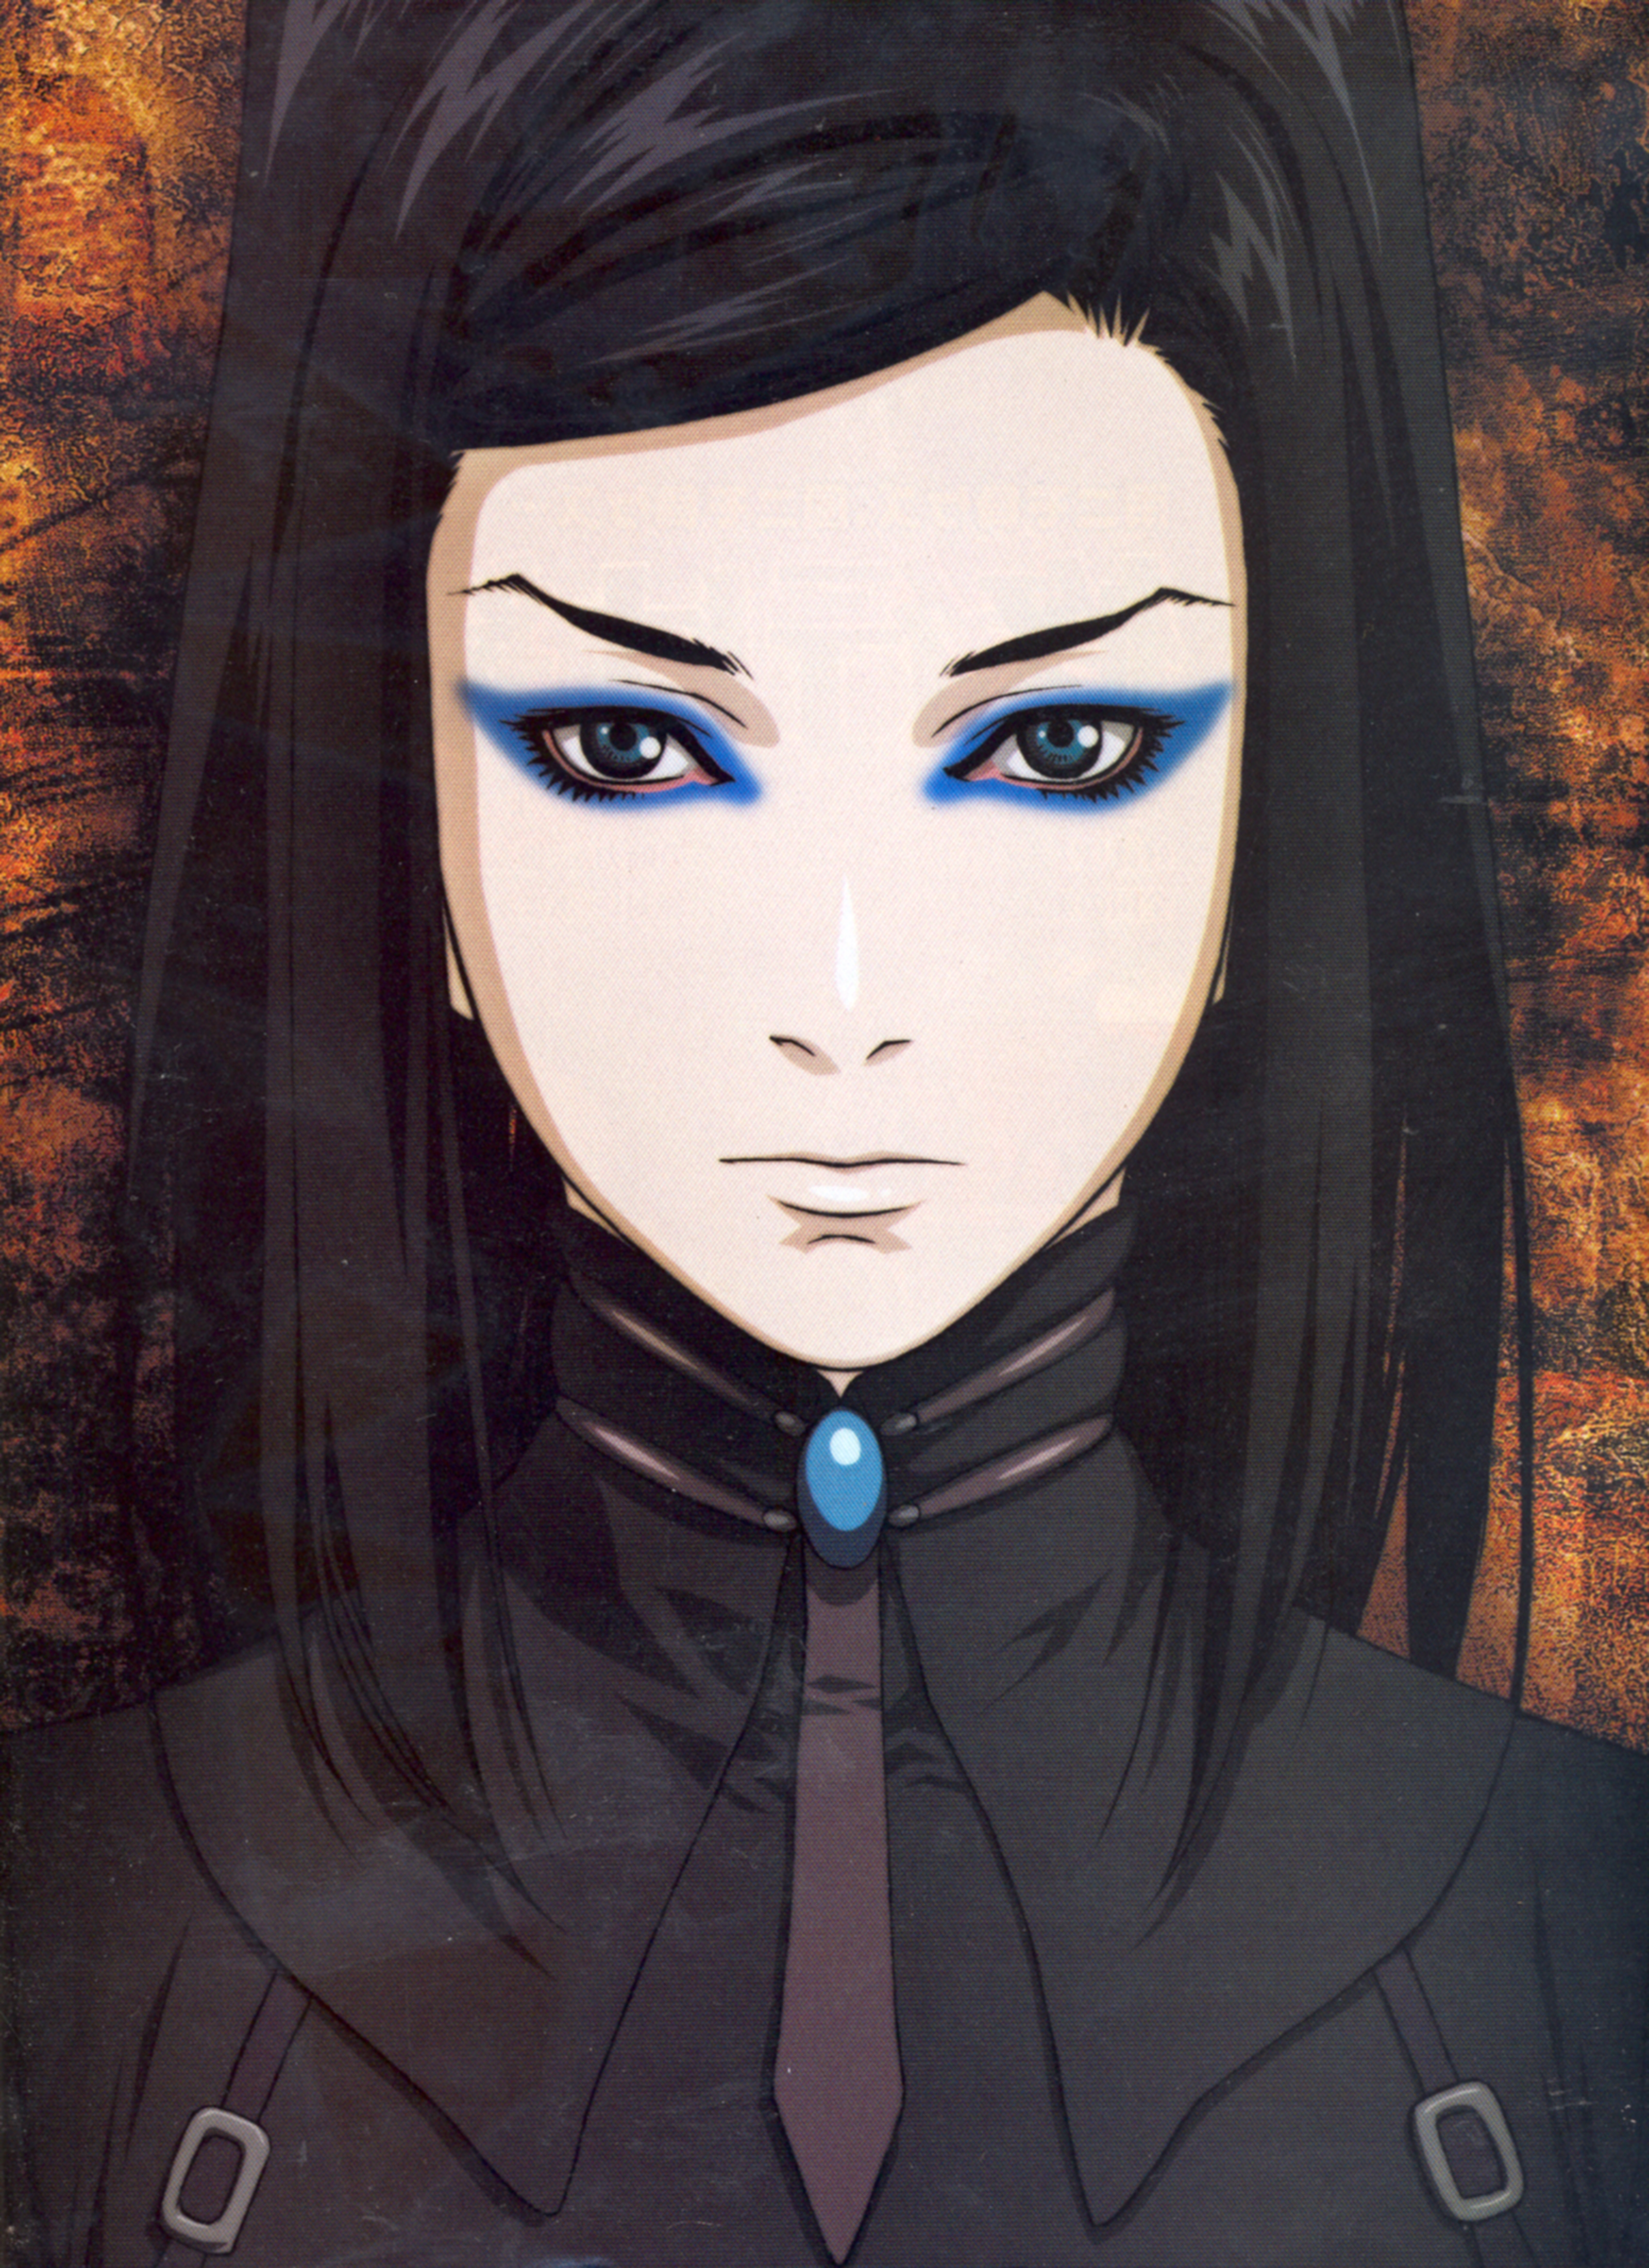 Amy Lee as Re-l Mayer in Ergo Proxy